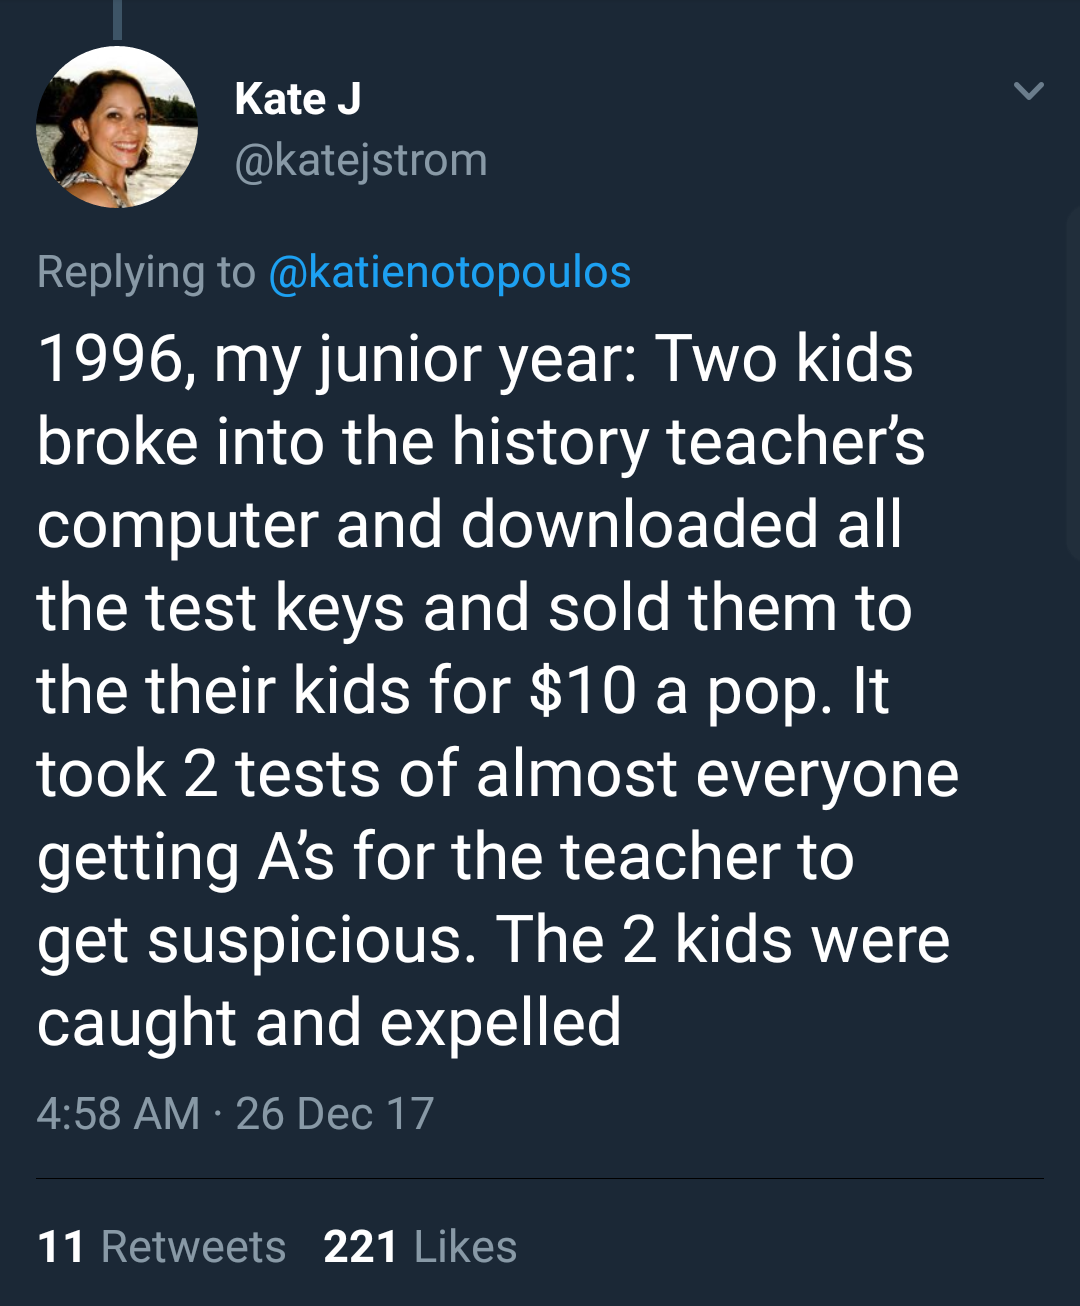 Kate J 1996, my junior year Two kids broke into the history teacher's computer and downloaded all the test keys and sold them to the their kids for $10 a pop. It took 2 tests of almost everyone getting A's for the teacher to get suspicious. The 2 kids wer